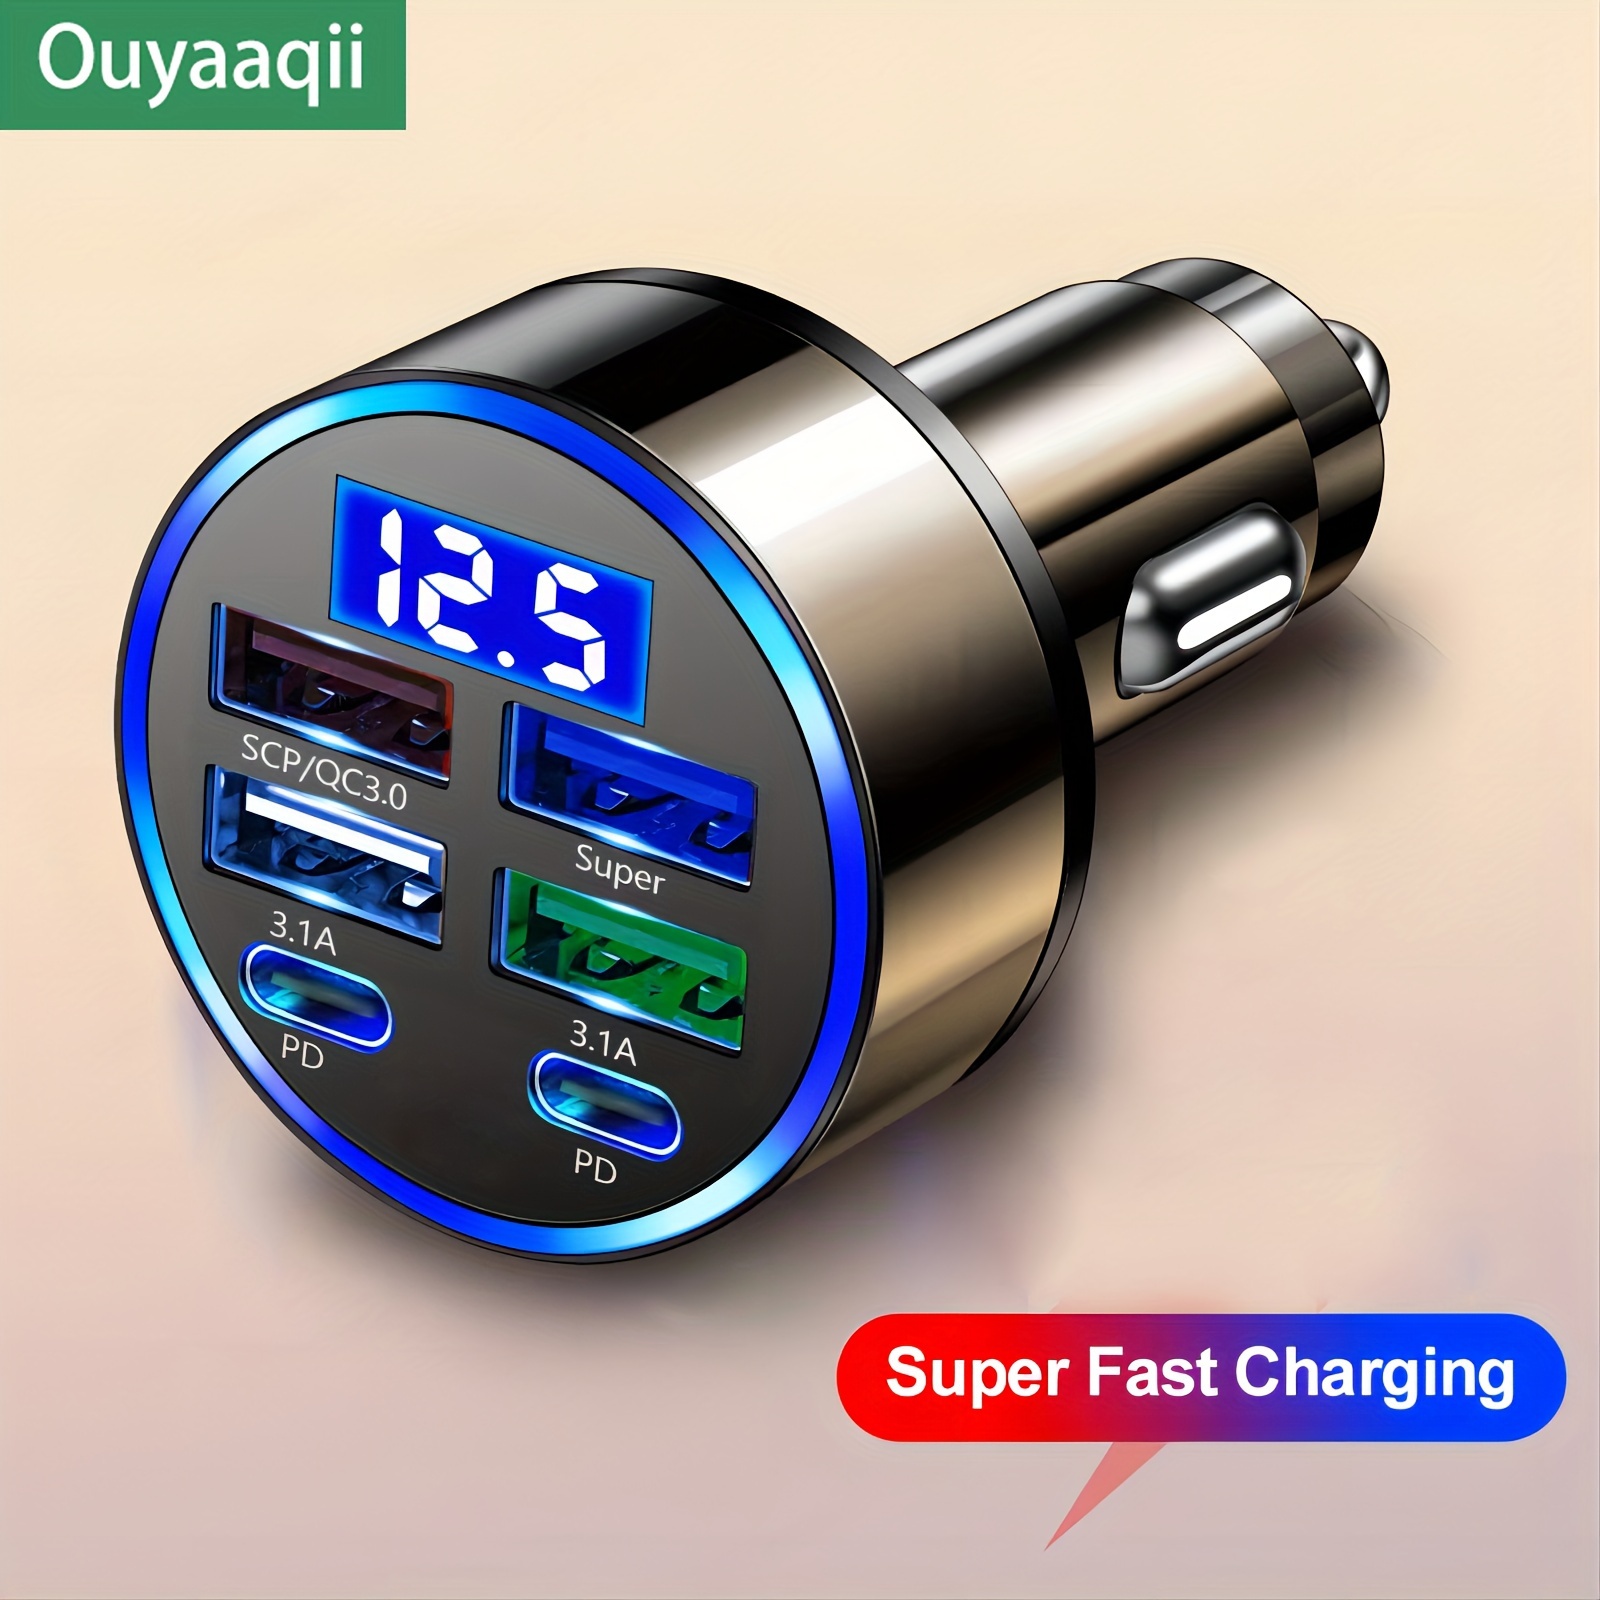 Car Charger With QC3.0 Fast Charging, 1 To 6 Multi-functional Car Adapter With PD Flash Charging And Digital Display